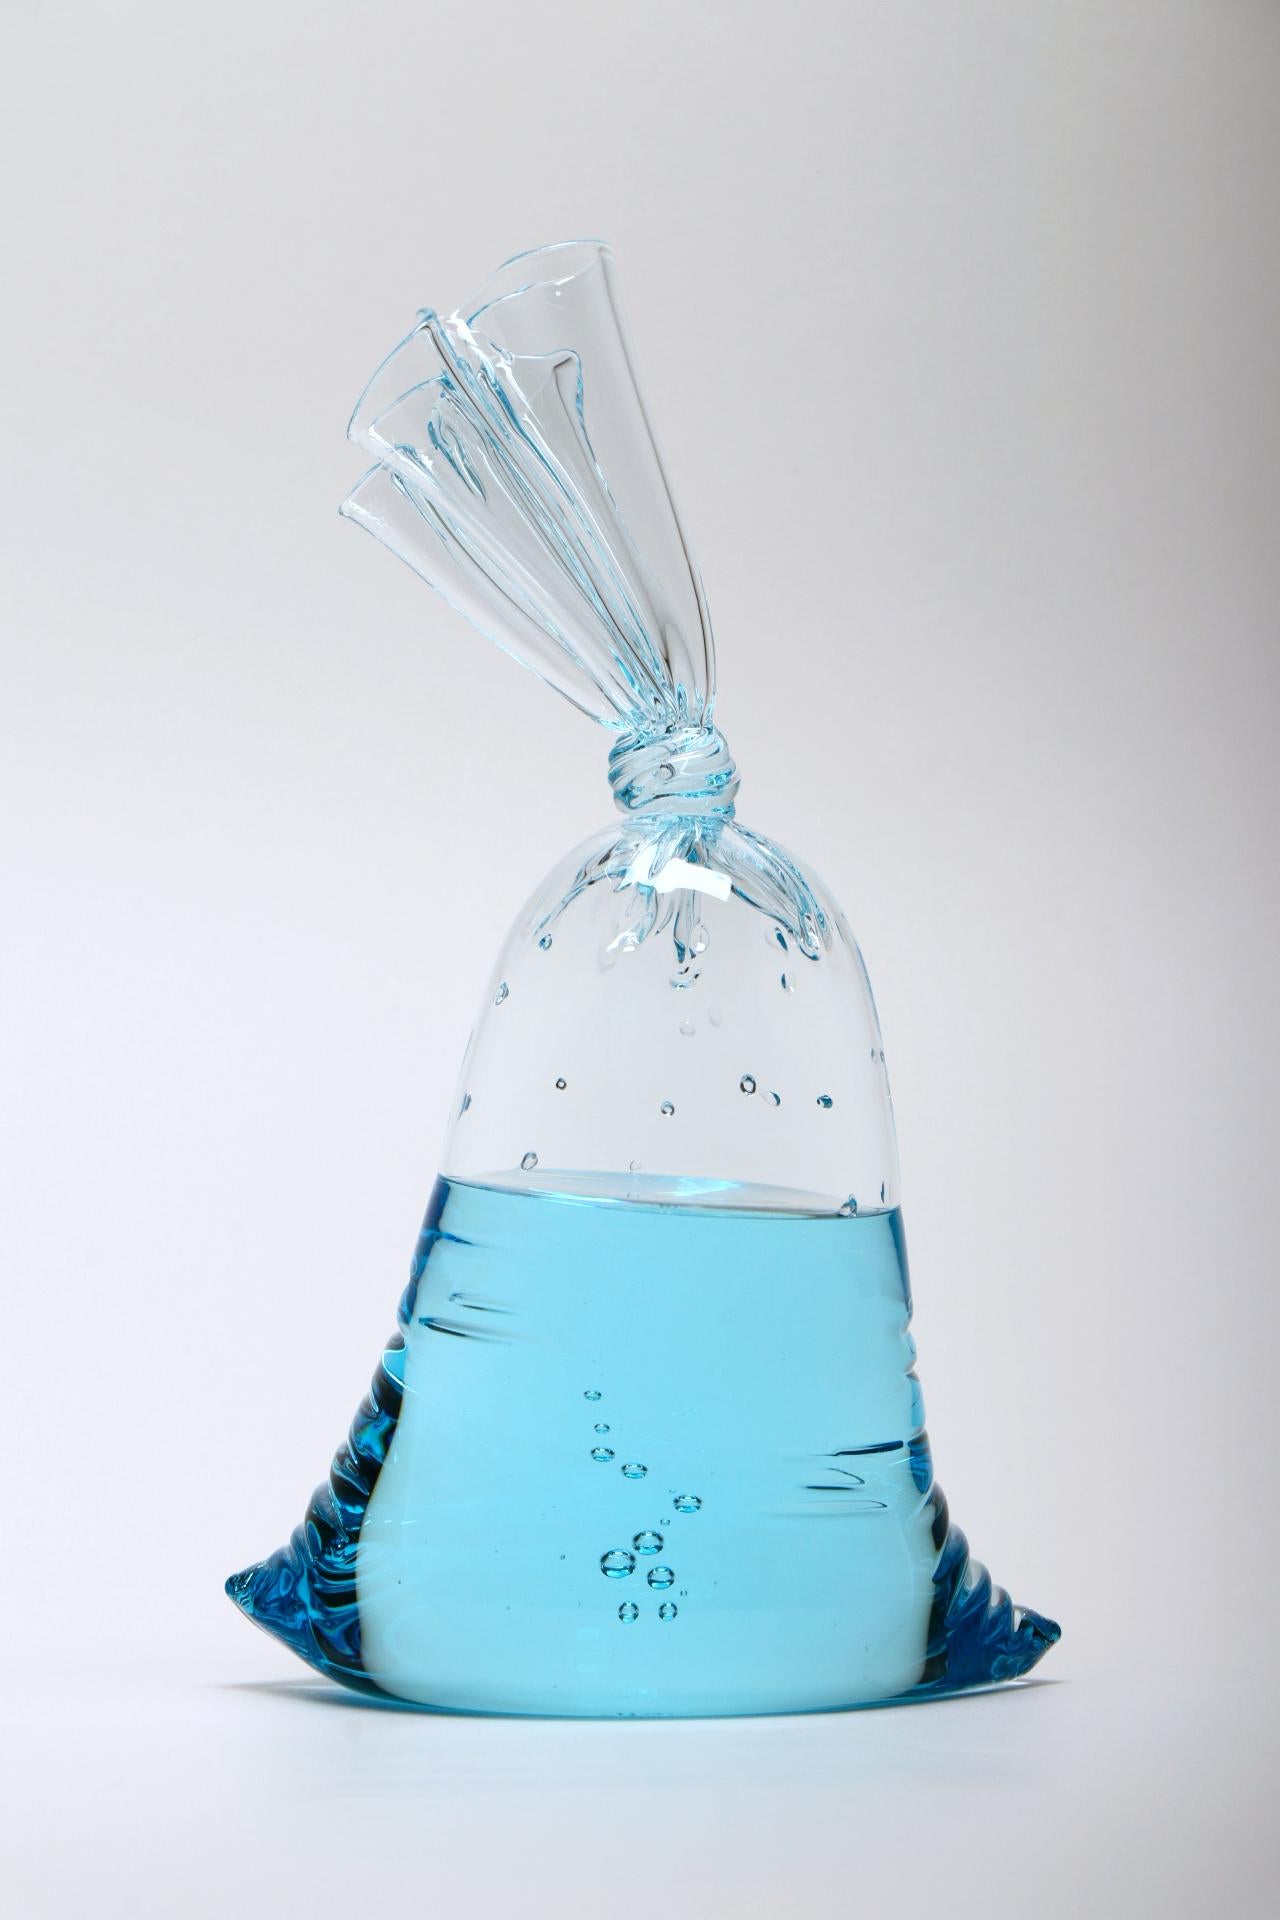 NEW RELEASE! Blue Series - Hyperreal small blue water bag glass sculpture, solid and hollow glass by Dylan Martinez. 

Size: 10.25 x 6 x 3.75 inches

Dylan Martinez' hyperreal sculptures are hot sculpted glass, hand molded entirely by the artist.